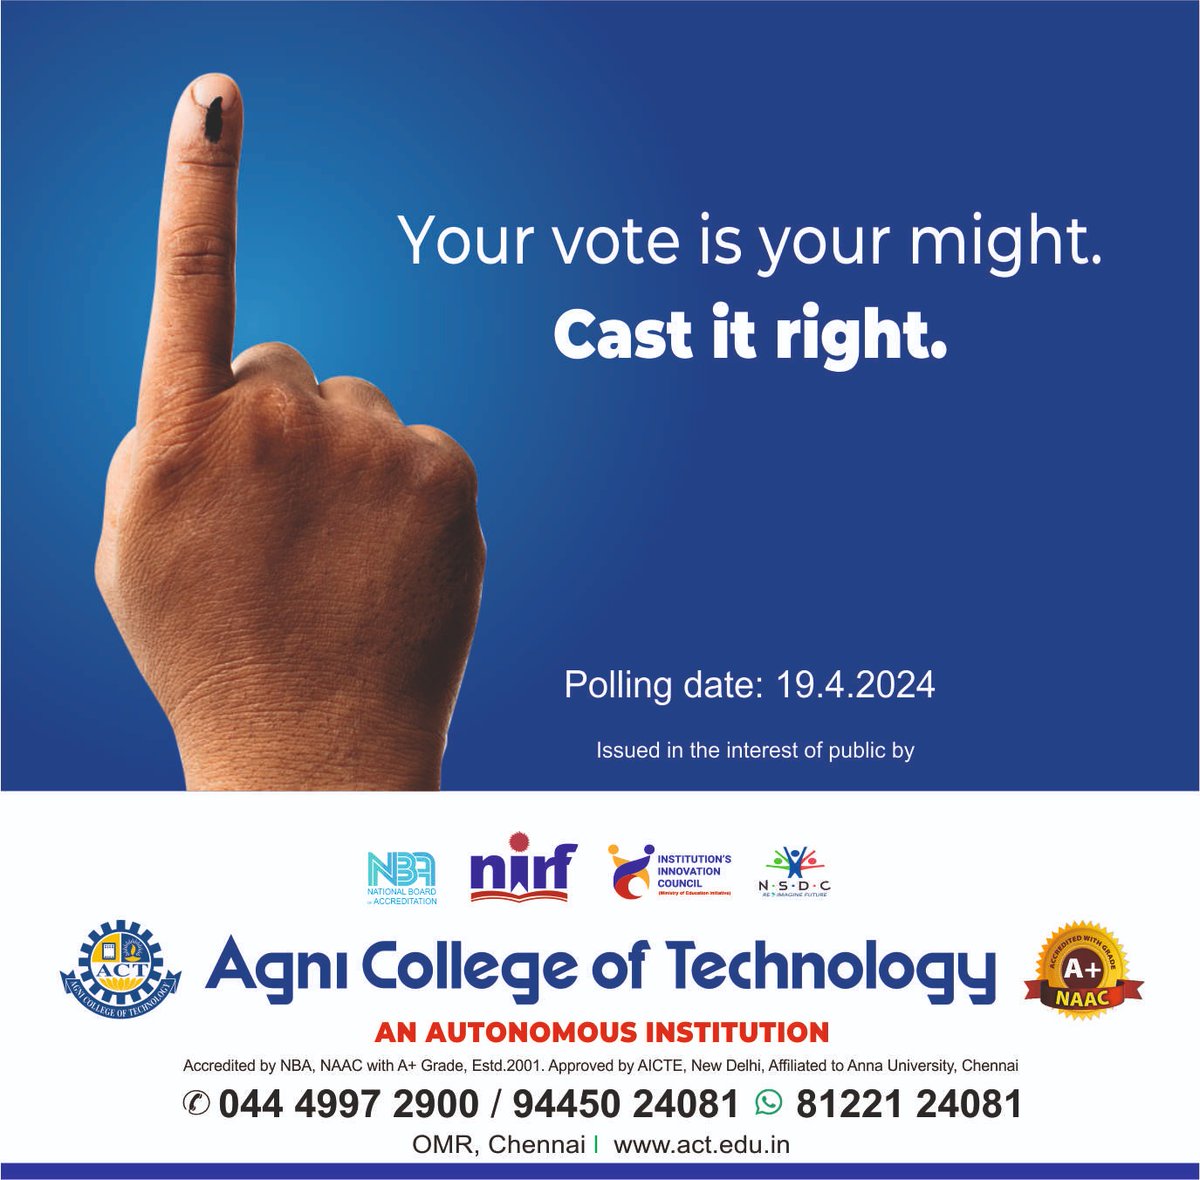 Empower your voice, shape your future. Remember, your vote is your might. 🗳️  Cast your vote and be part of the change. Your vote is your power. Use it wisely on 19th April 2024

#AgniCollegeofTechnology #ElectionDay #VotingMatters #Democracy #YourVoiceYourVote #YourVoteYourRight